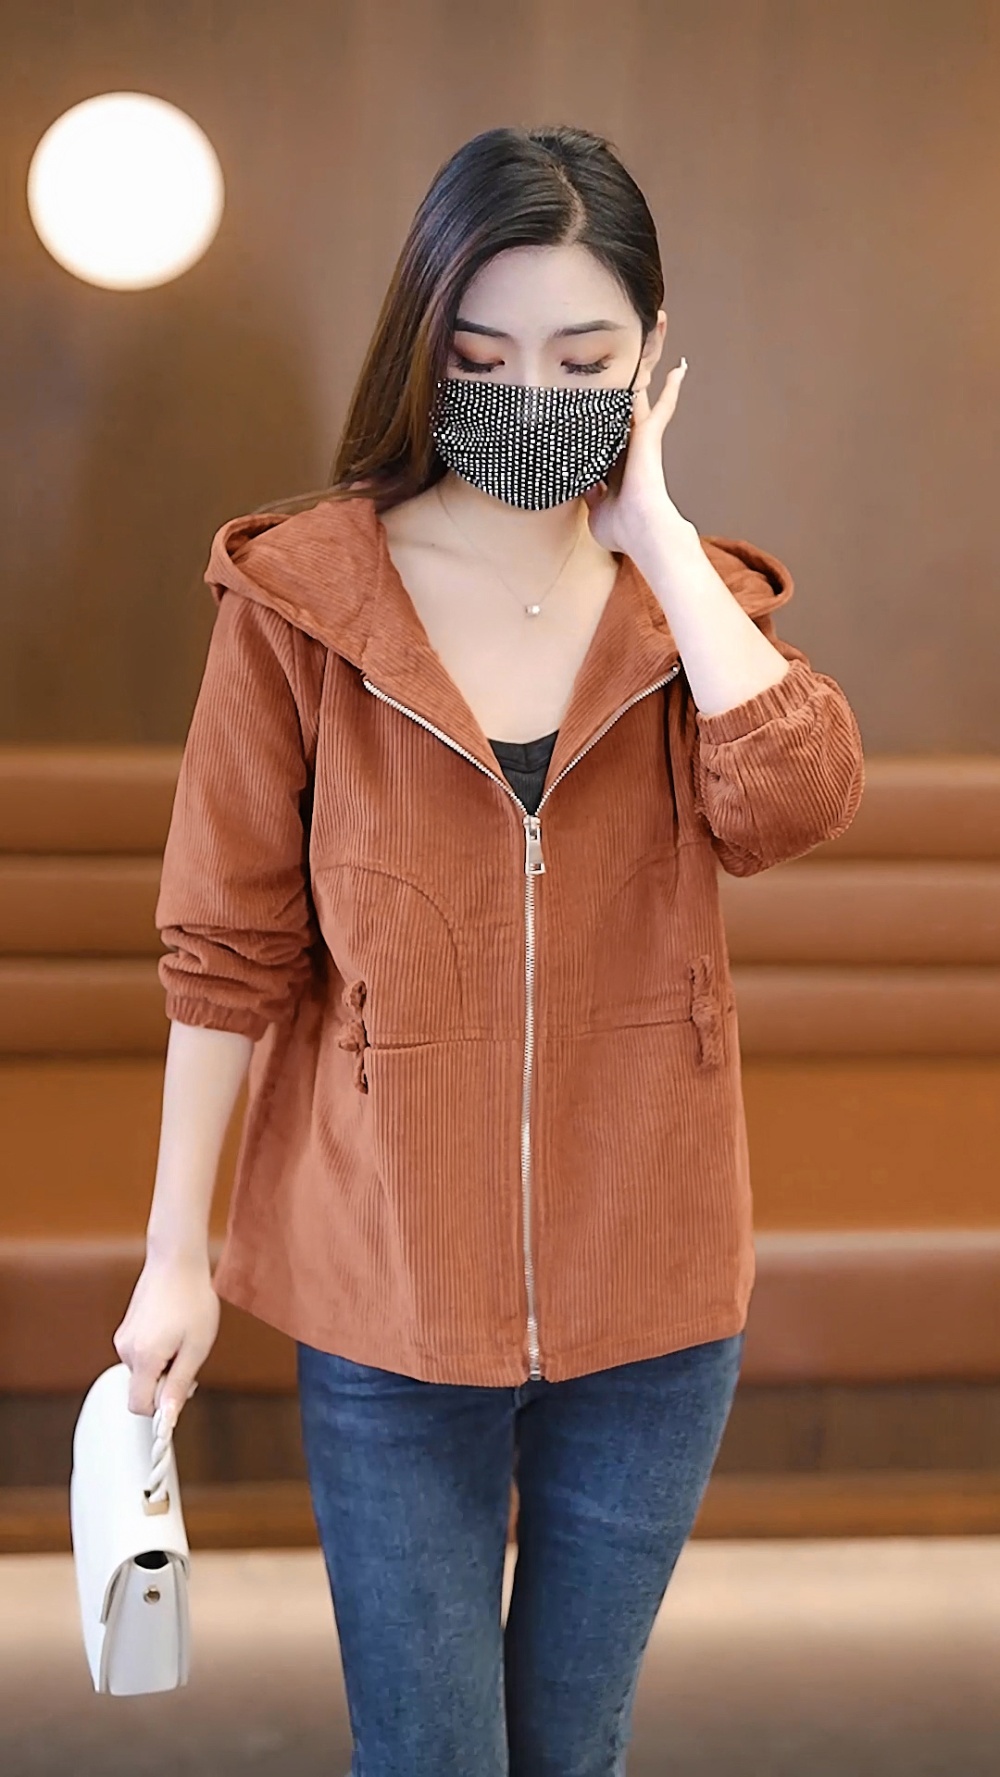 Casual fashionable jacket middle-aged tops for women